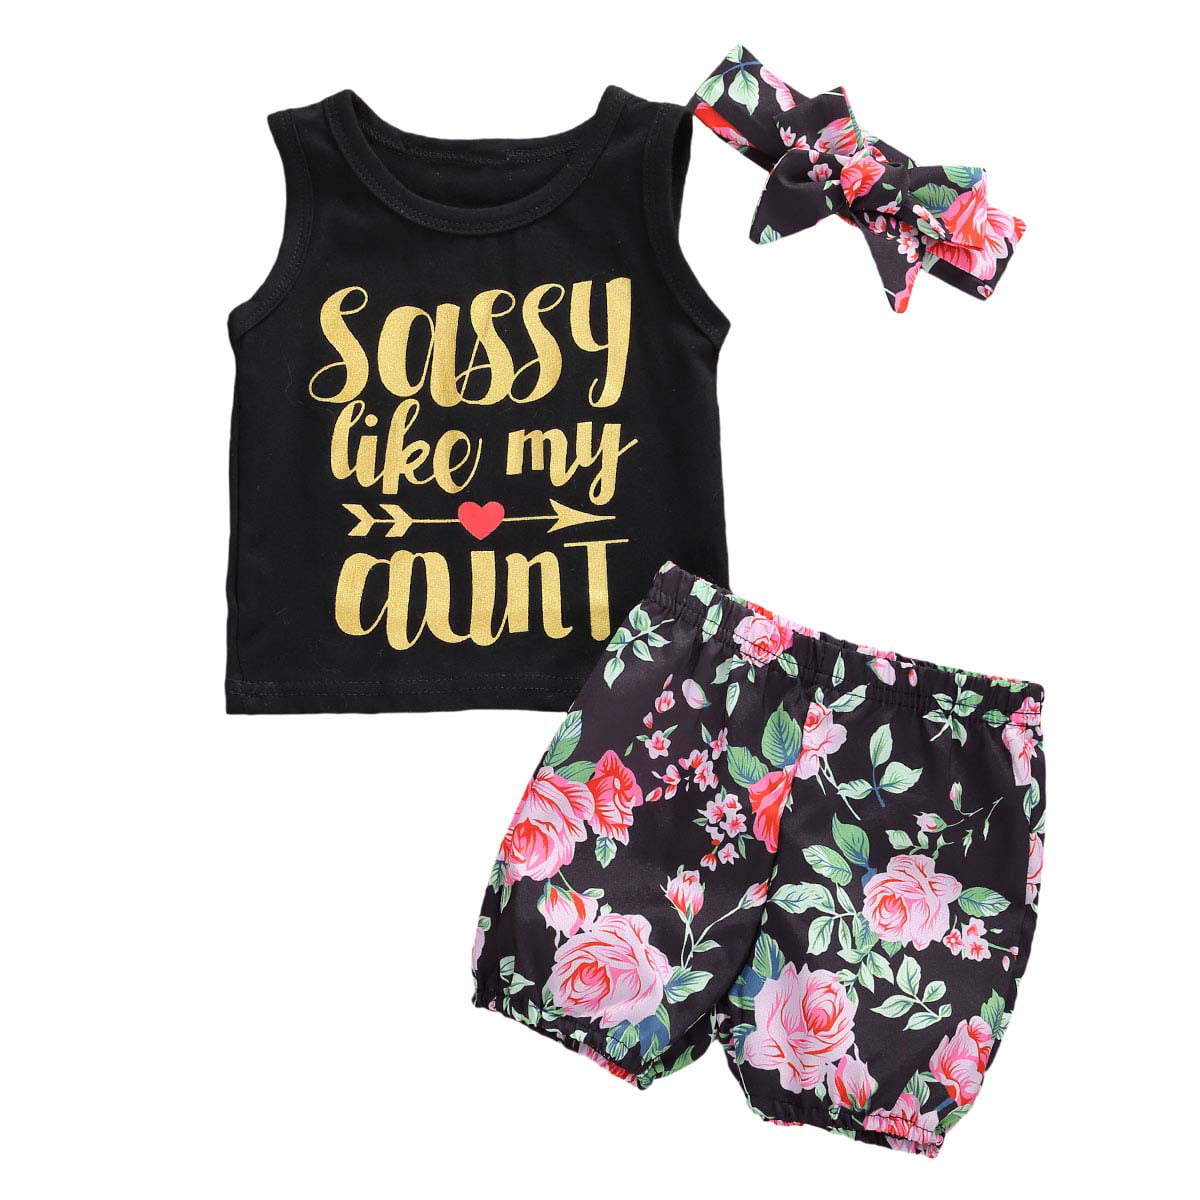 Toddler Girl Sleeveless Outfits Miss Sassy Pants Floral Shorts Set Clothes